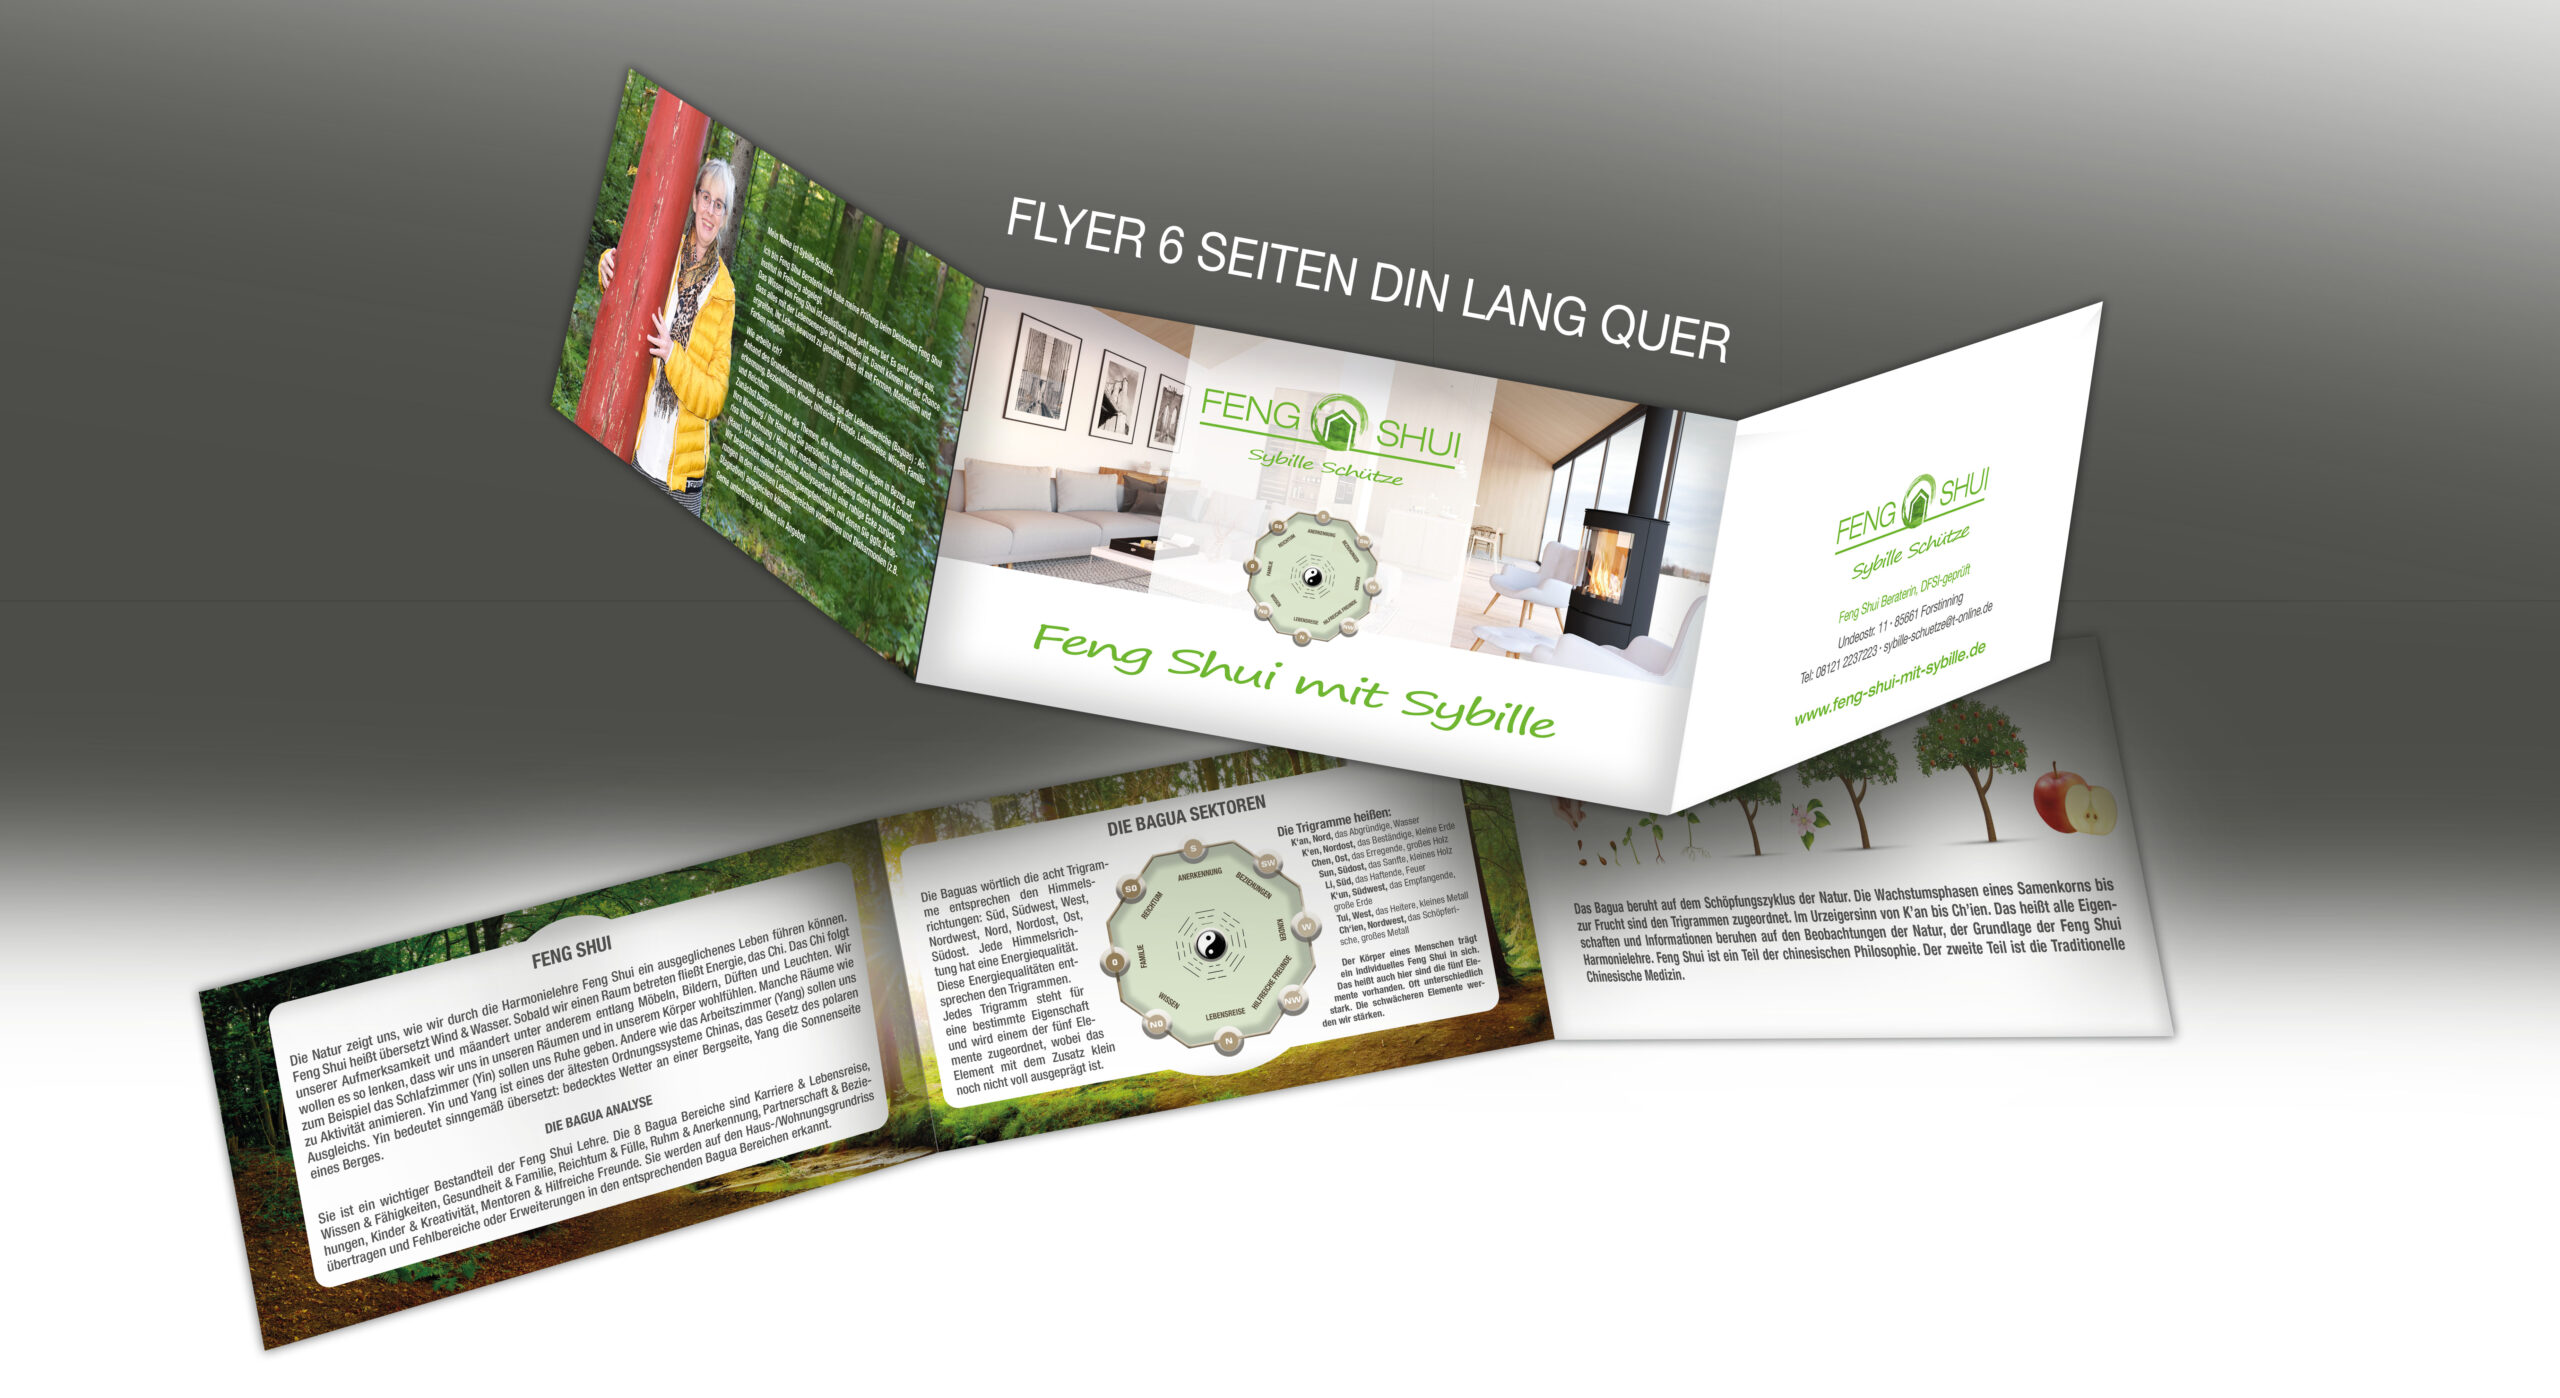 Flyer-Feng Shui mit Sybille